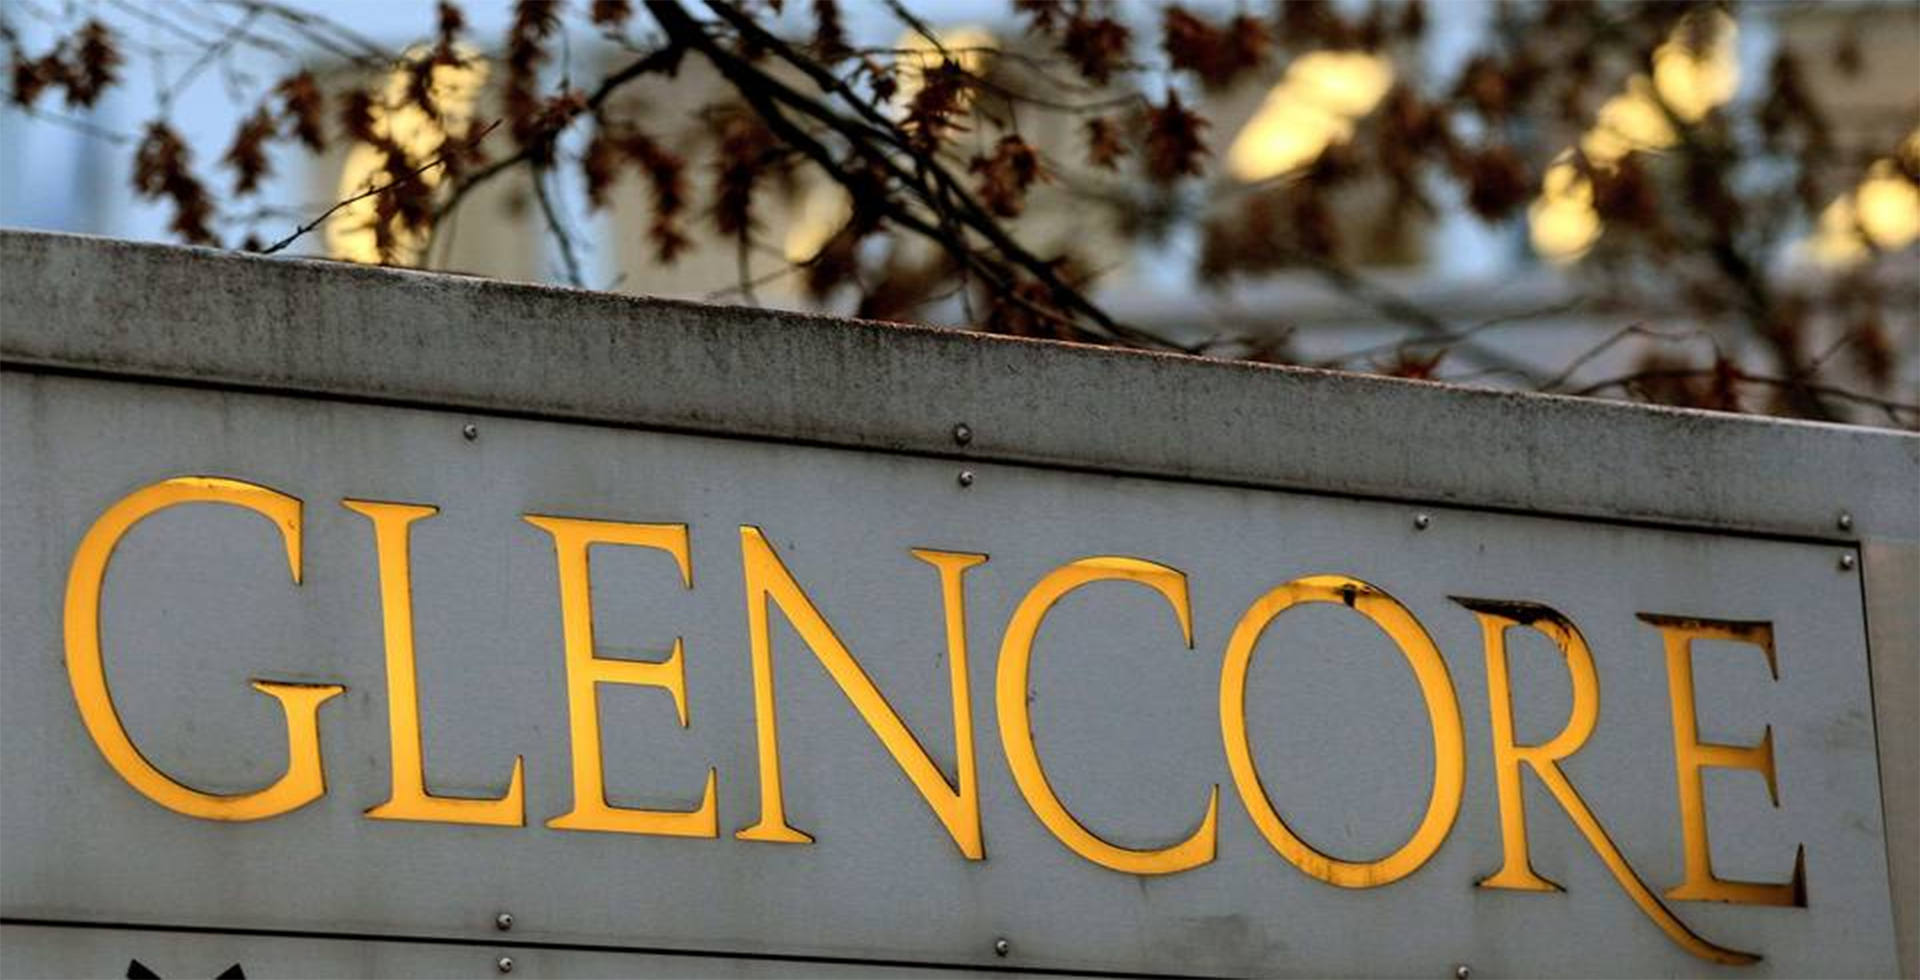 Glencore mining production suspension at KCC in DRC and Mopani in Zambia: a strategy to deprive the two states of their public financial resources needed